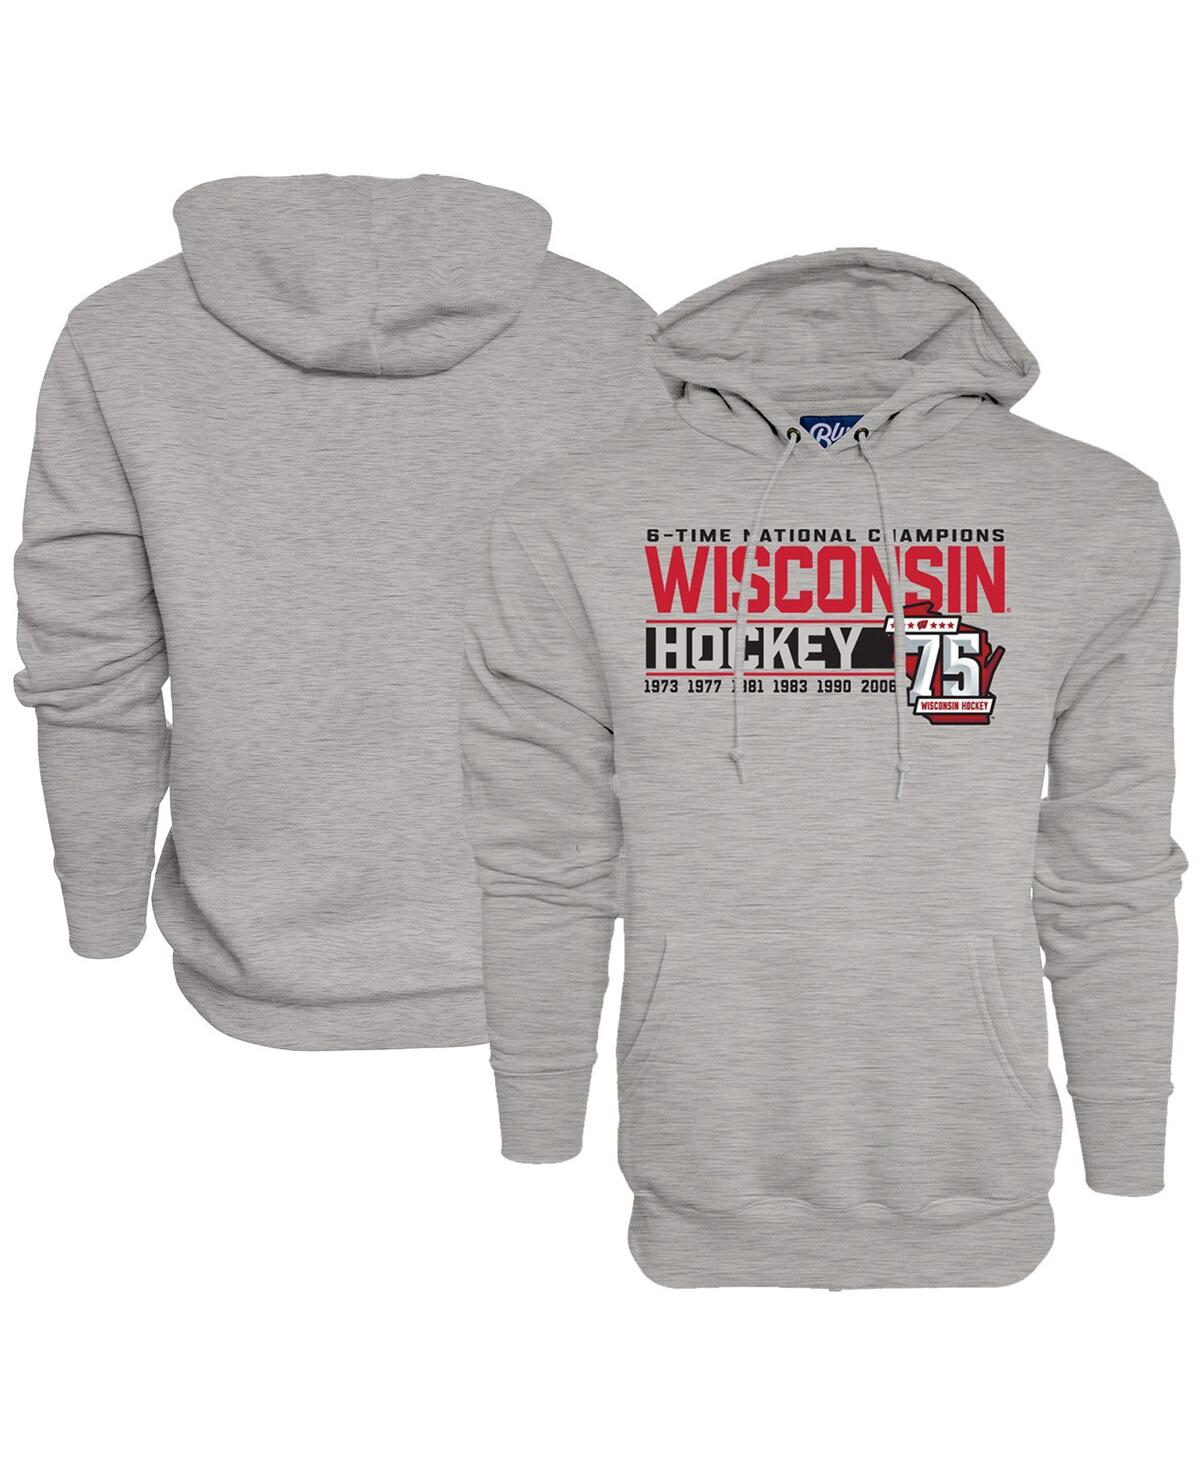 Men's Blue 84 Heather Gray Wisconsin Badgers Men's Hockey 75th Season and Six-Time National Champions Pullover Hoodie - Heather Gray